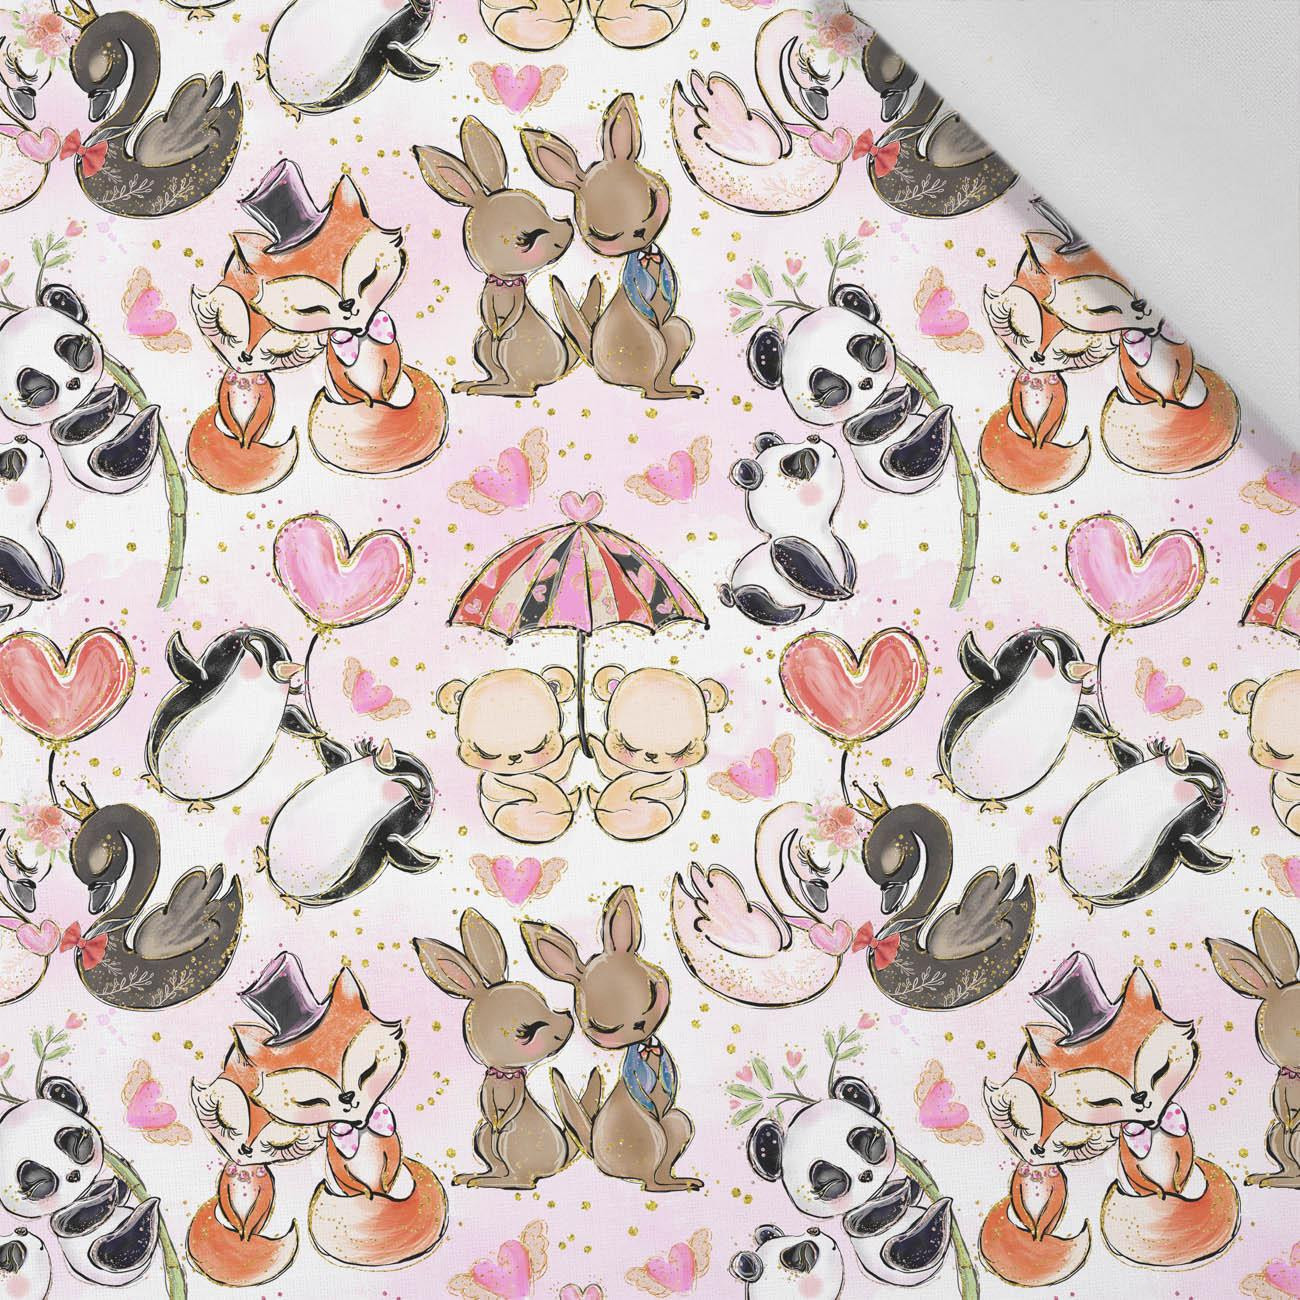 LITTLE ANIMALS IN LOVE - Cotton woven fabric